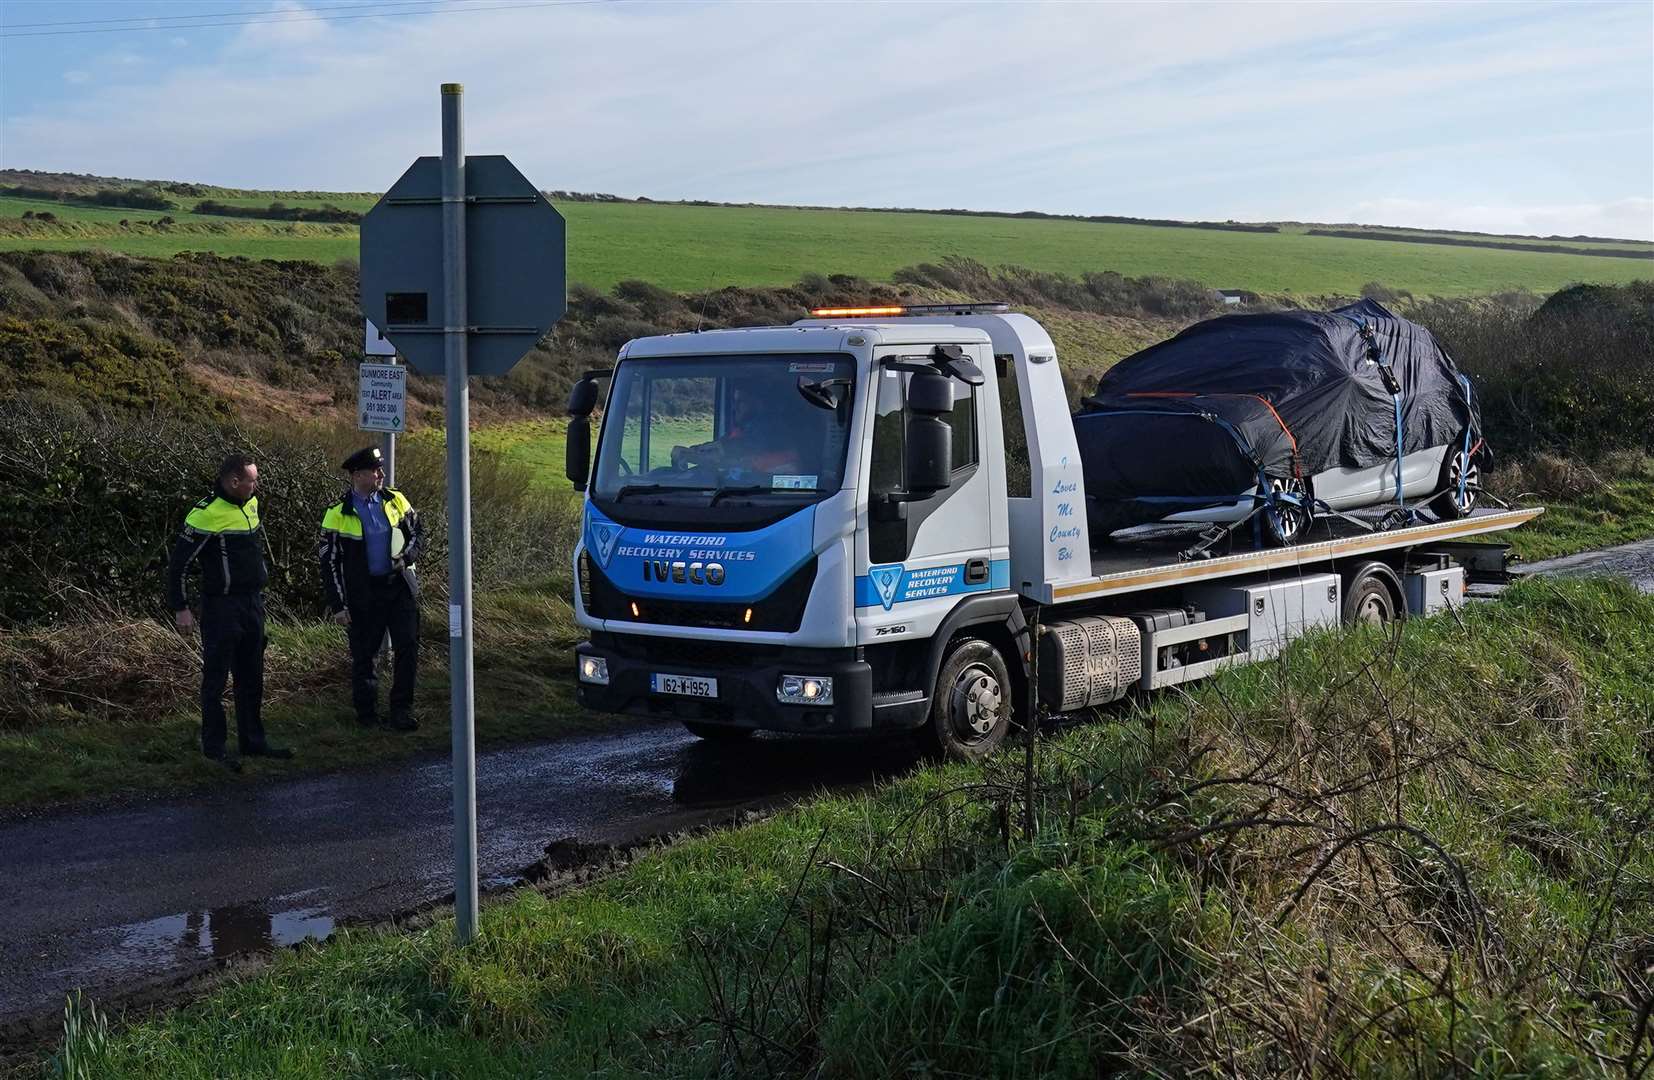 A car is removed from the Rathmoylan area of Dunmore East, Co Waterford, where police are investigating the death of a six-year-old boy whose body was found in a car (Brian Lawless/PA)